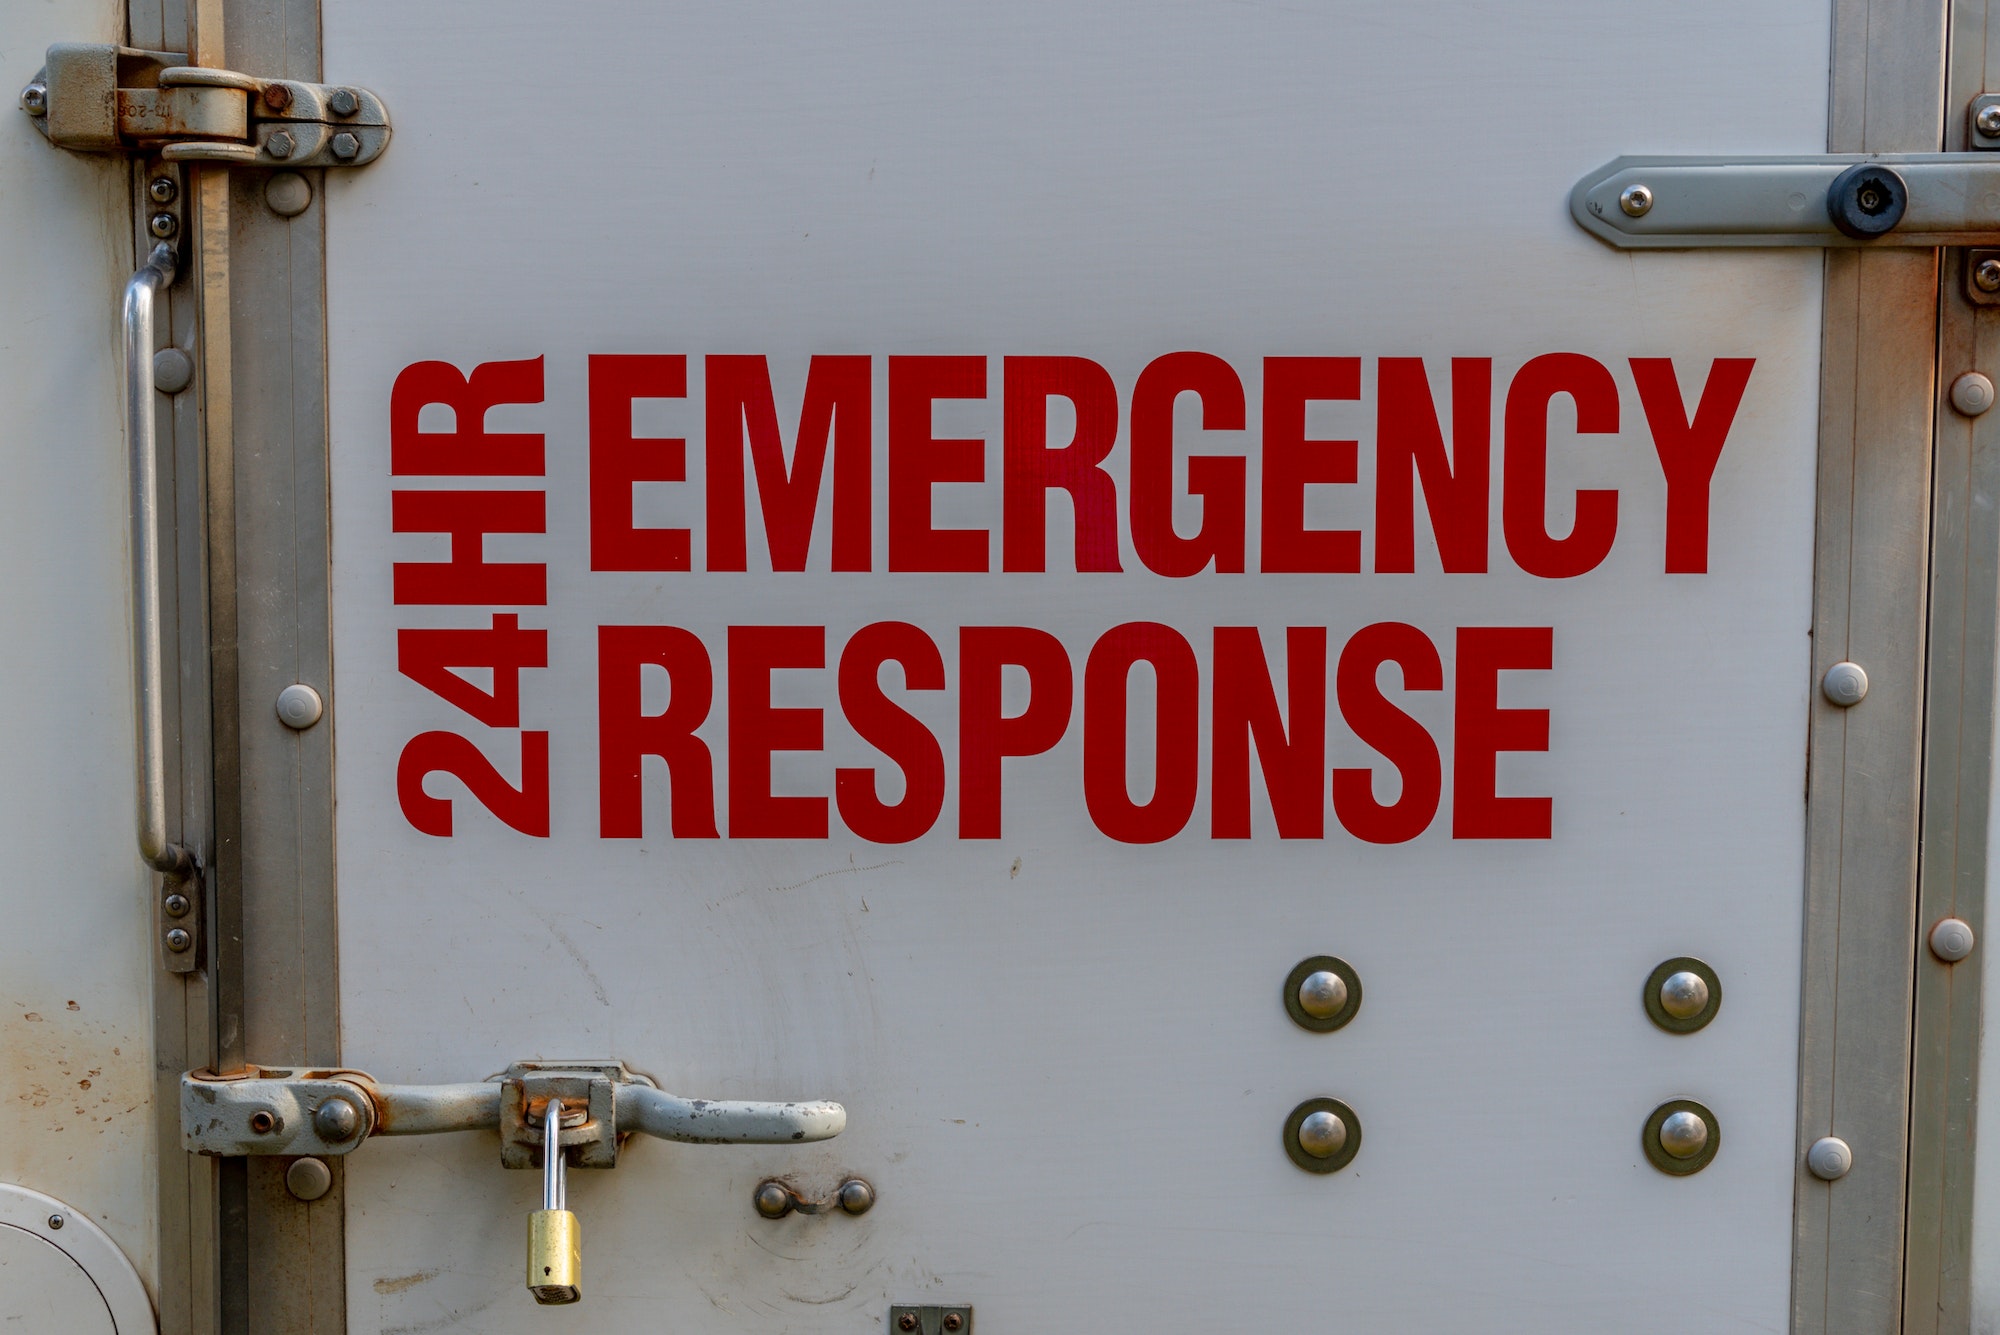 24hr Emergency Response on the side of a rescue vehicle